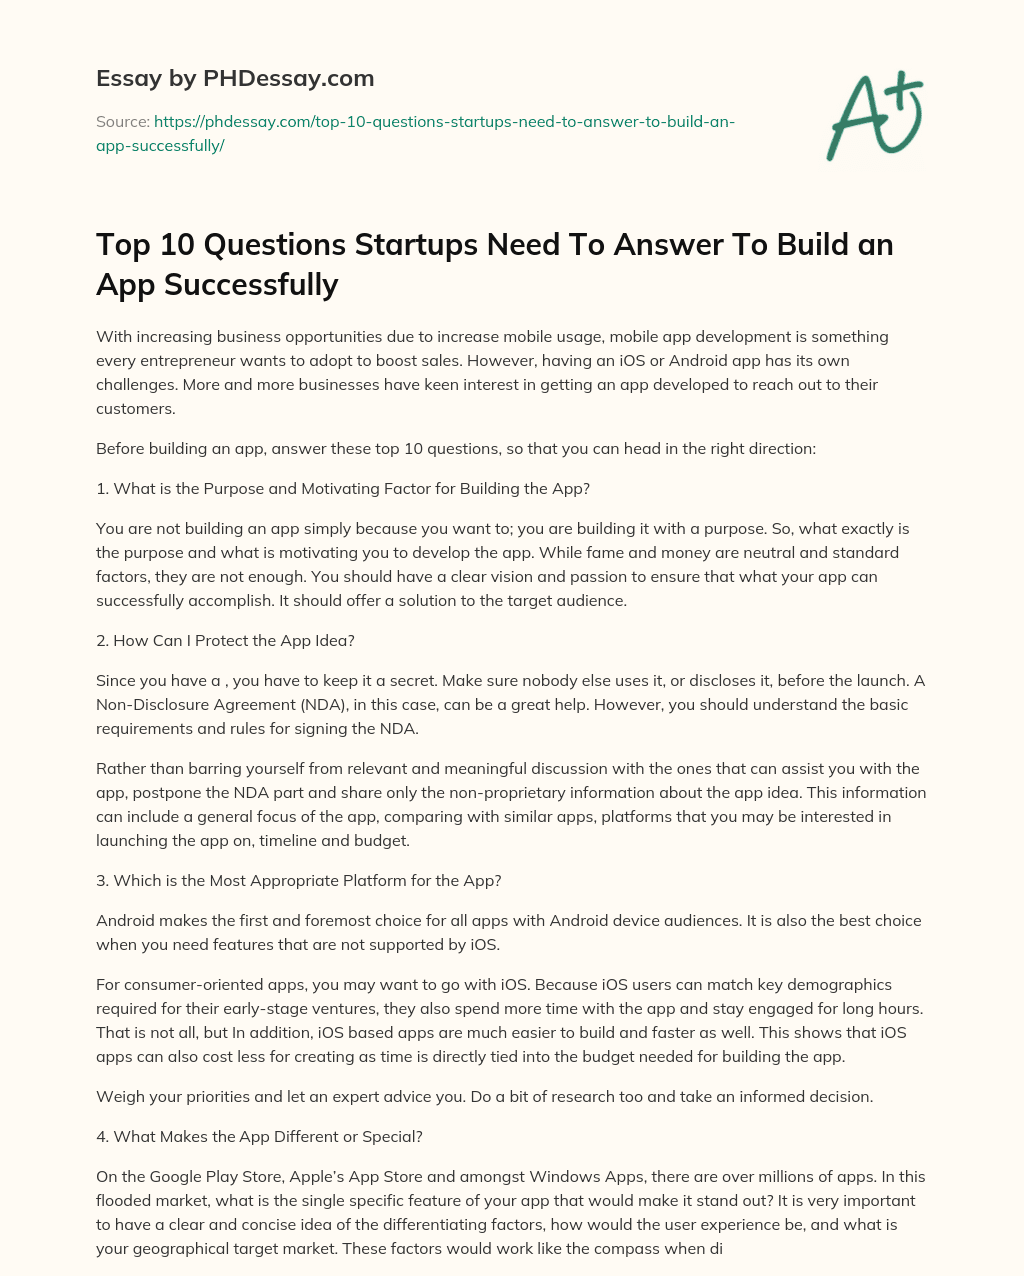 Top 10 Questions Startups Need To Answer To Build an App Successfully essay